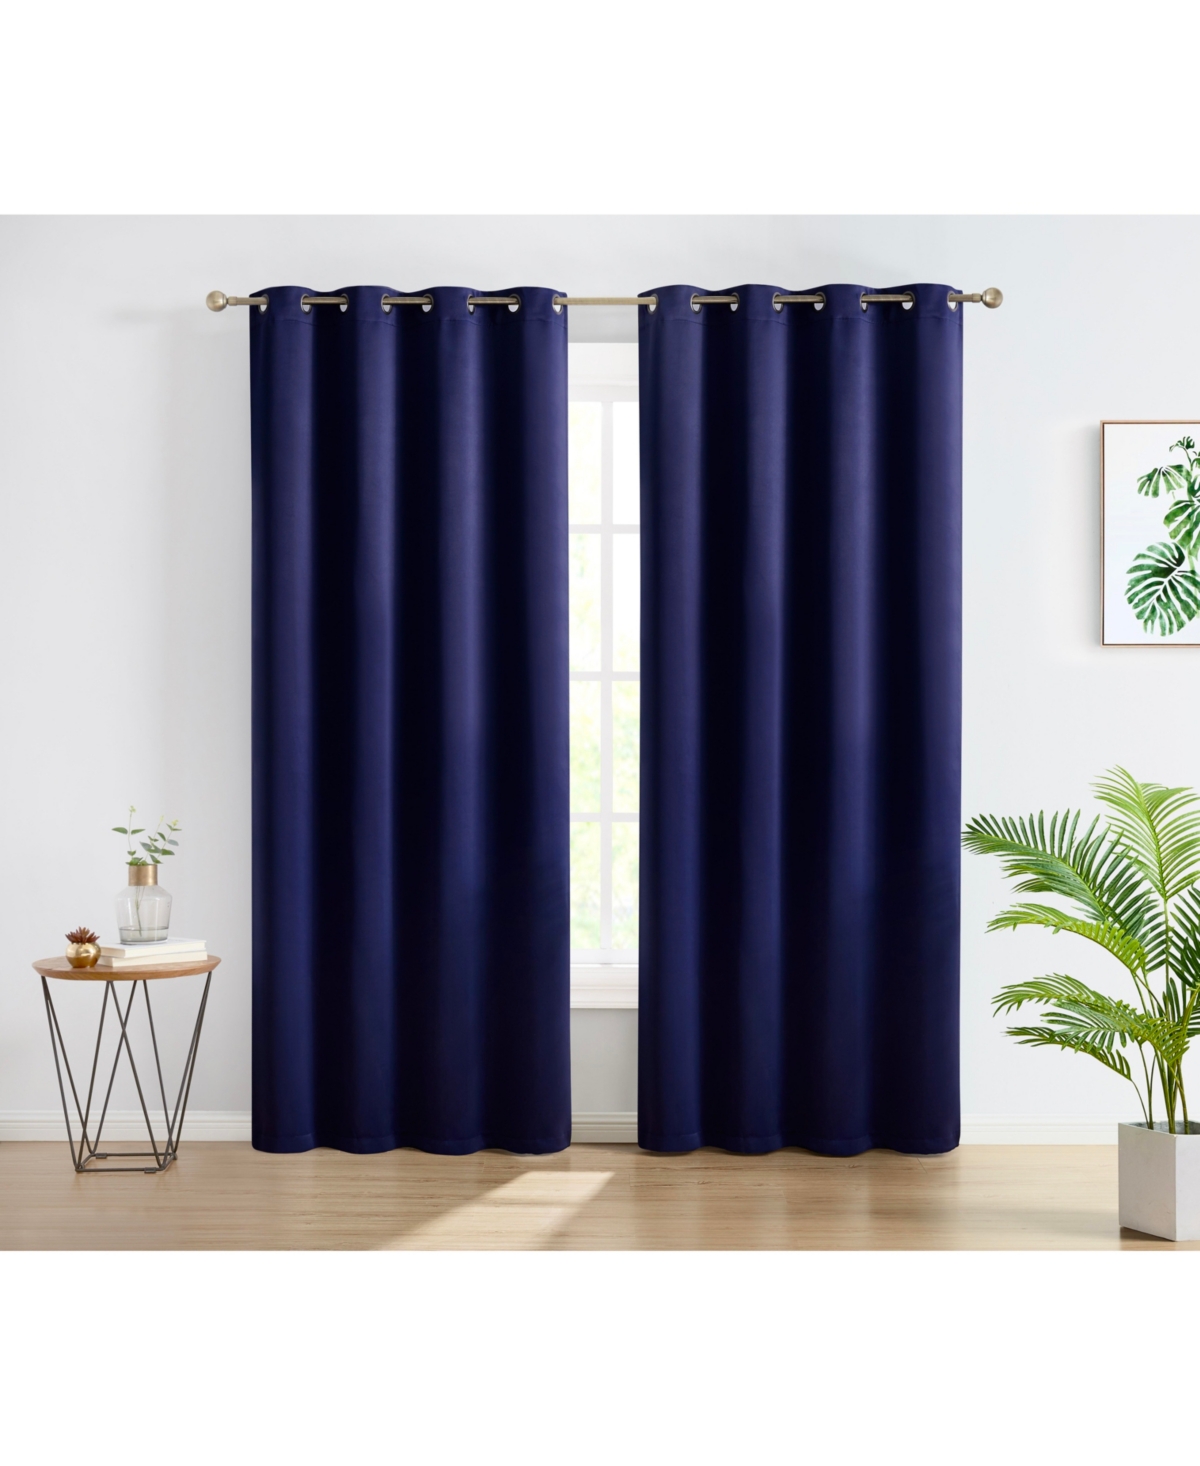 Oxford Blackout Curtains for Bedroom, Noise Reduction Thermal Insulated Window Curtain Grommet Panels, Set of 2 - Navy blue